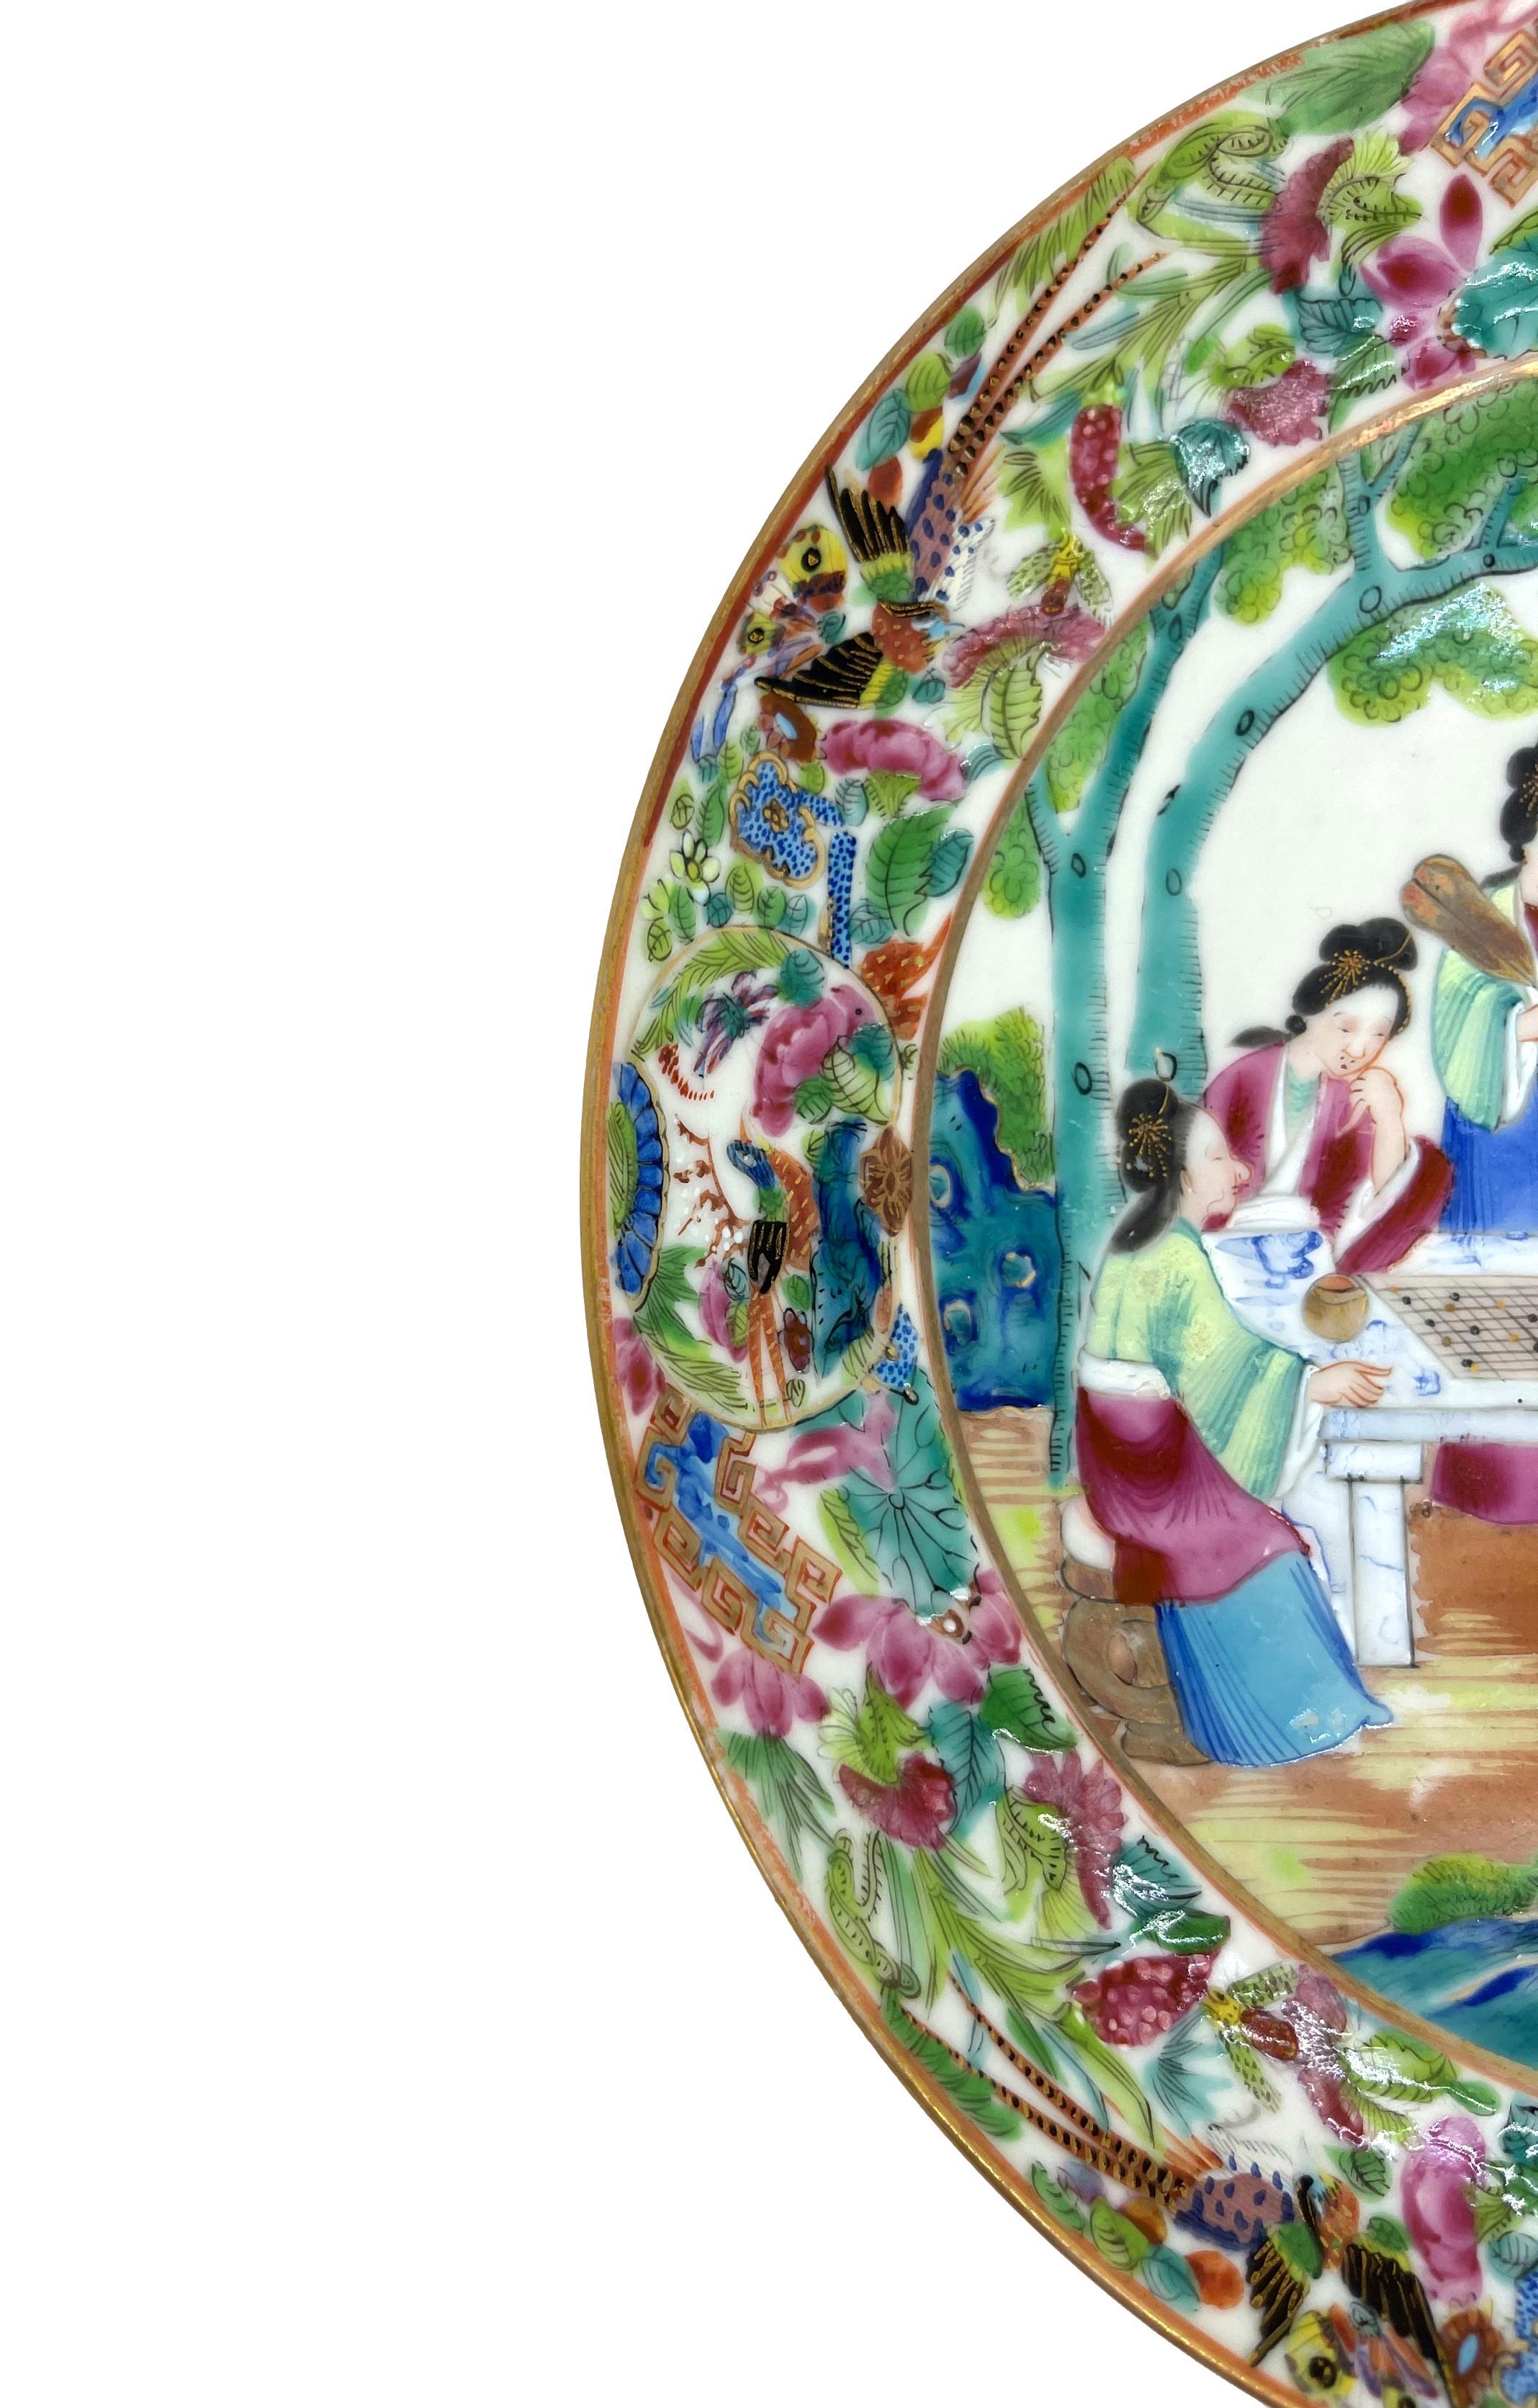 Chinese Export Porcelain Canton Famille Rose plate, ca. 1820. The round plate with a central design depicting a theatre pavilion Imperial Court scene with figures at a Wei Qi board, with hyper-vivid enamels and fine gilt accents, with multi-layered